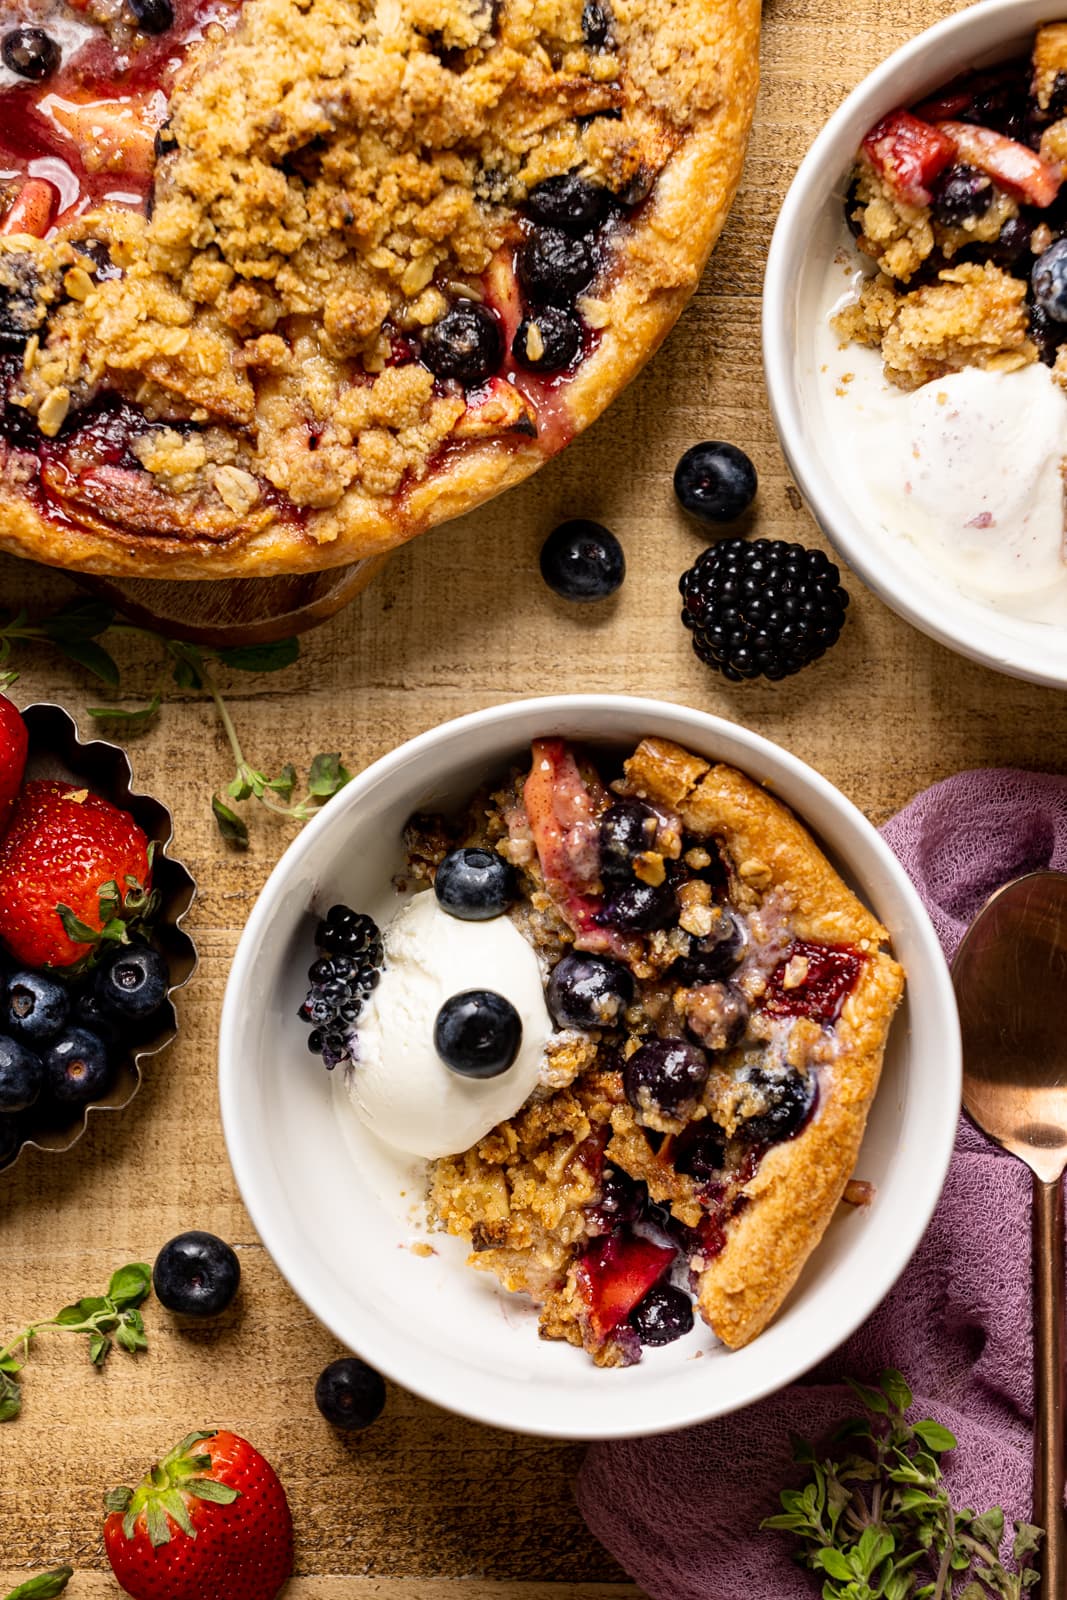 Pie slice in a white bowl on a brown wood table with a scoop of ice cream and berries alongside baked pie.